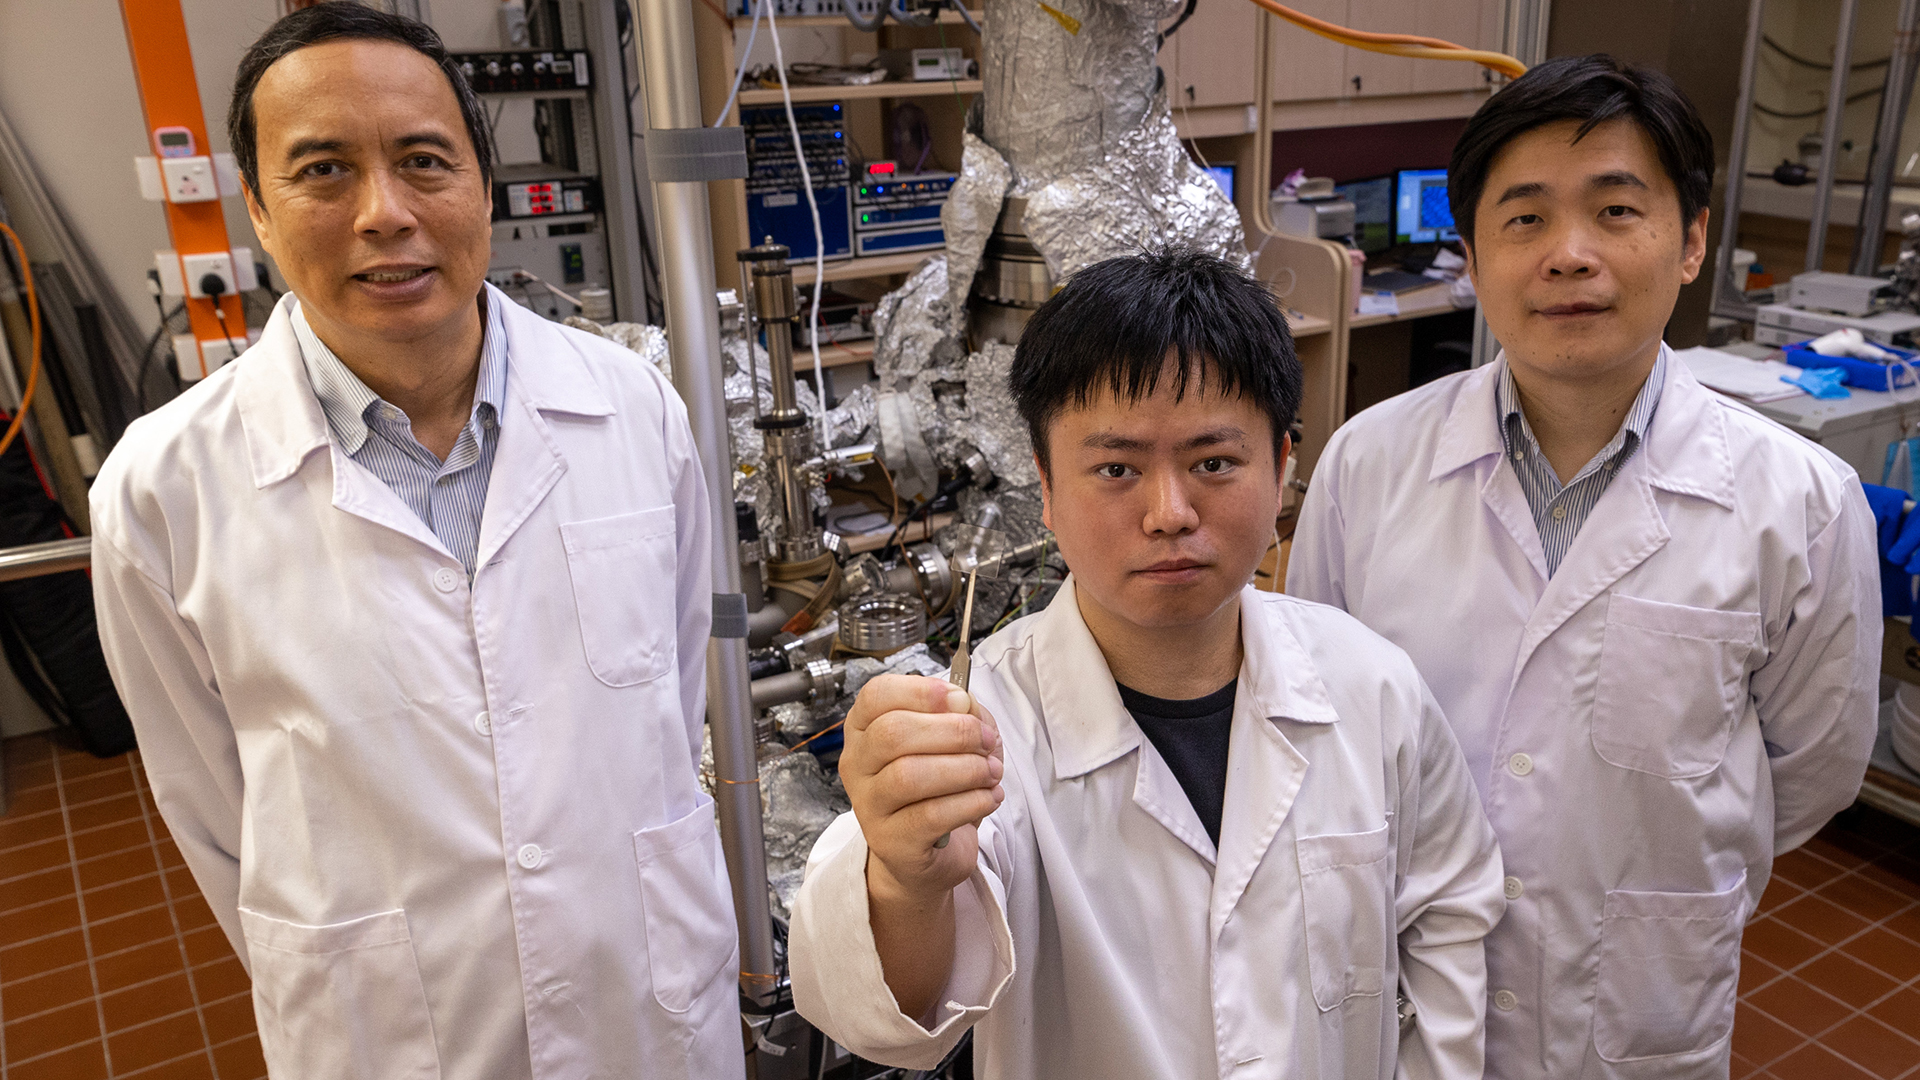 <a class="newsPhotoCaptionText1">Researchers behind the discovery: From right to left, Associate Professor Cheng-Wei Qiu and Dr. Qiangbing Guo (Dept of Electrical and Computer Engineering), with <br />Professor Andrew T. S. Wee (NUS Physics)</a><br />